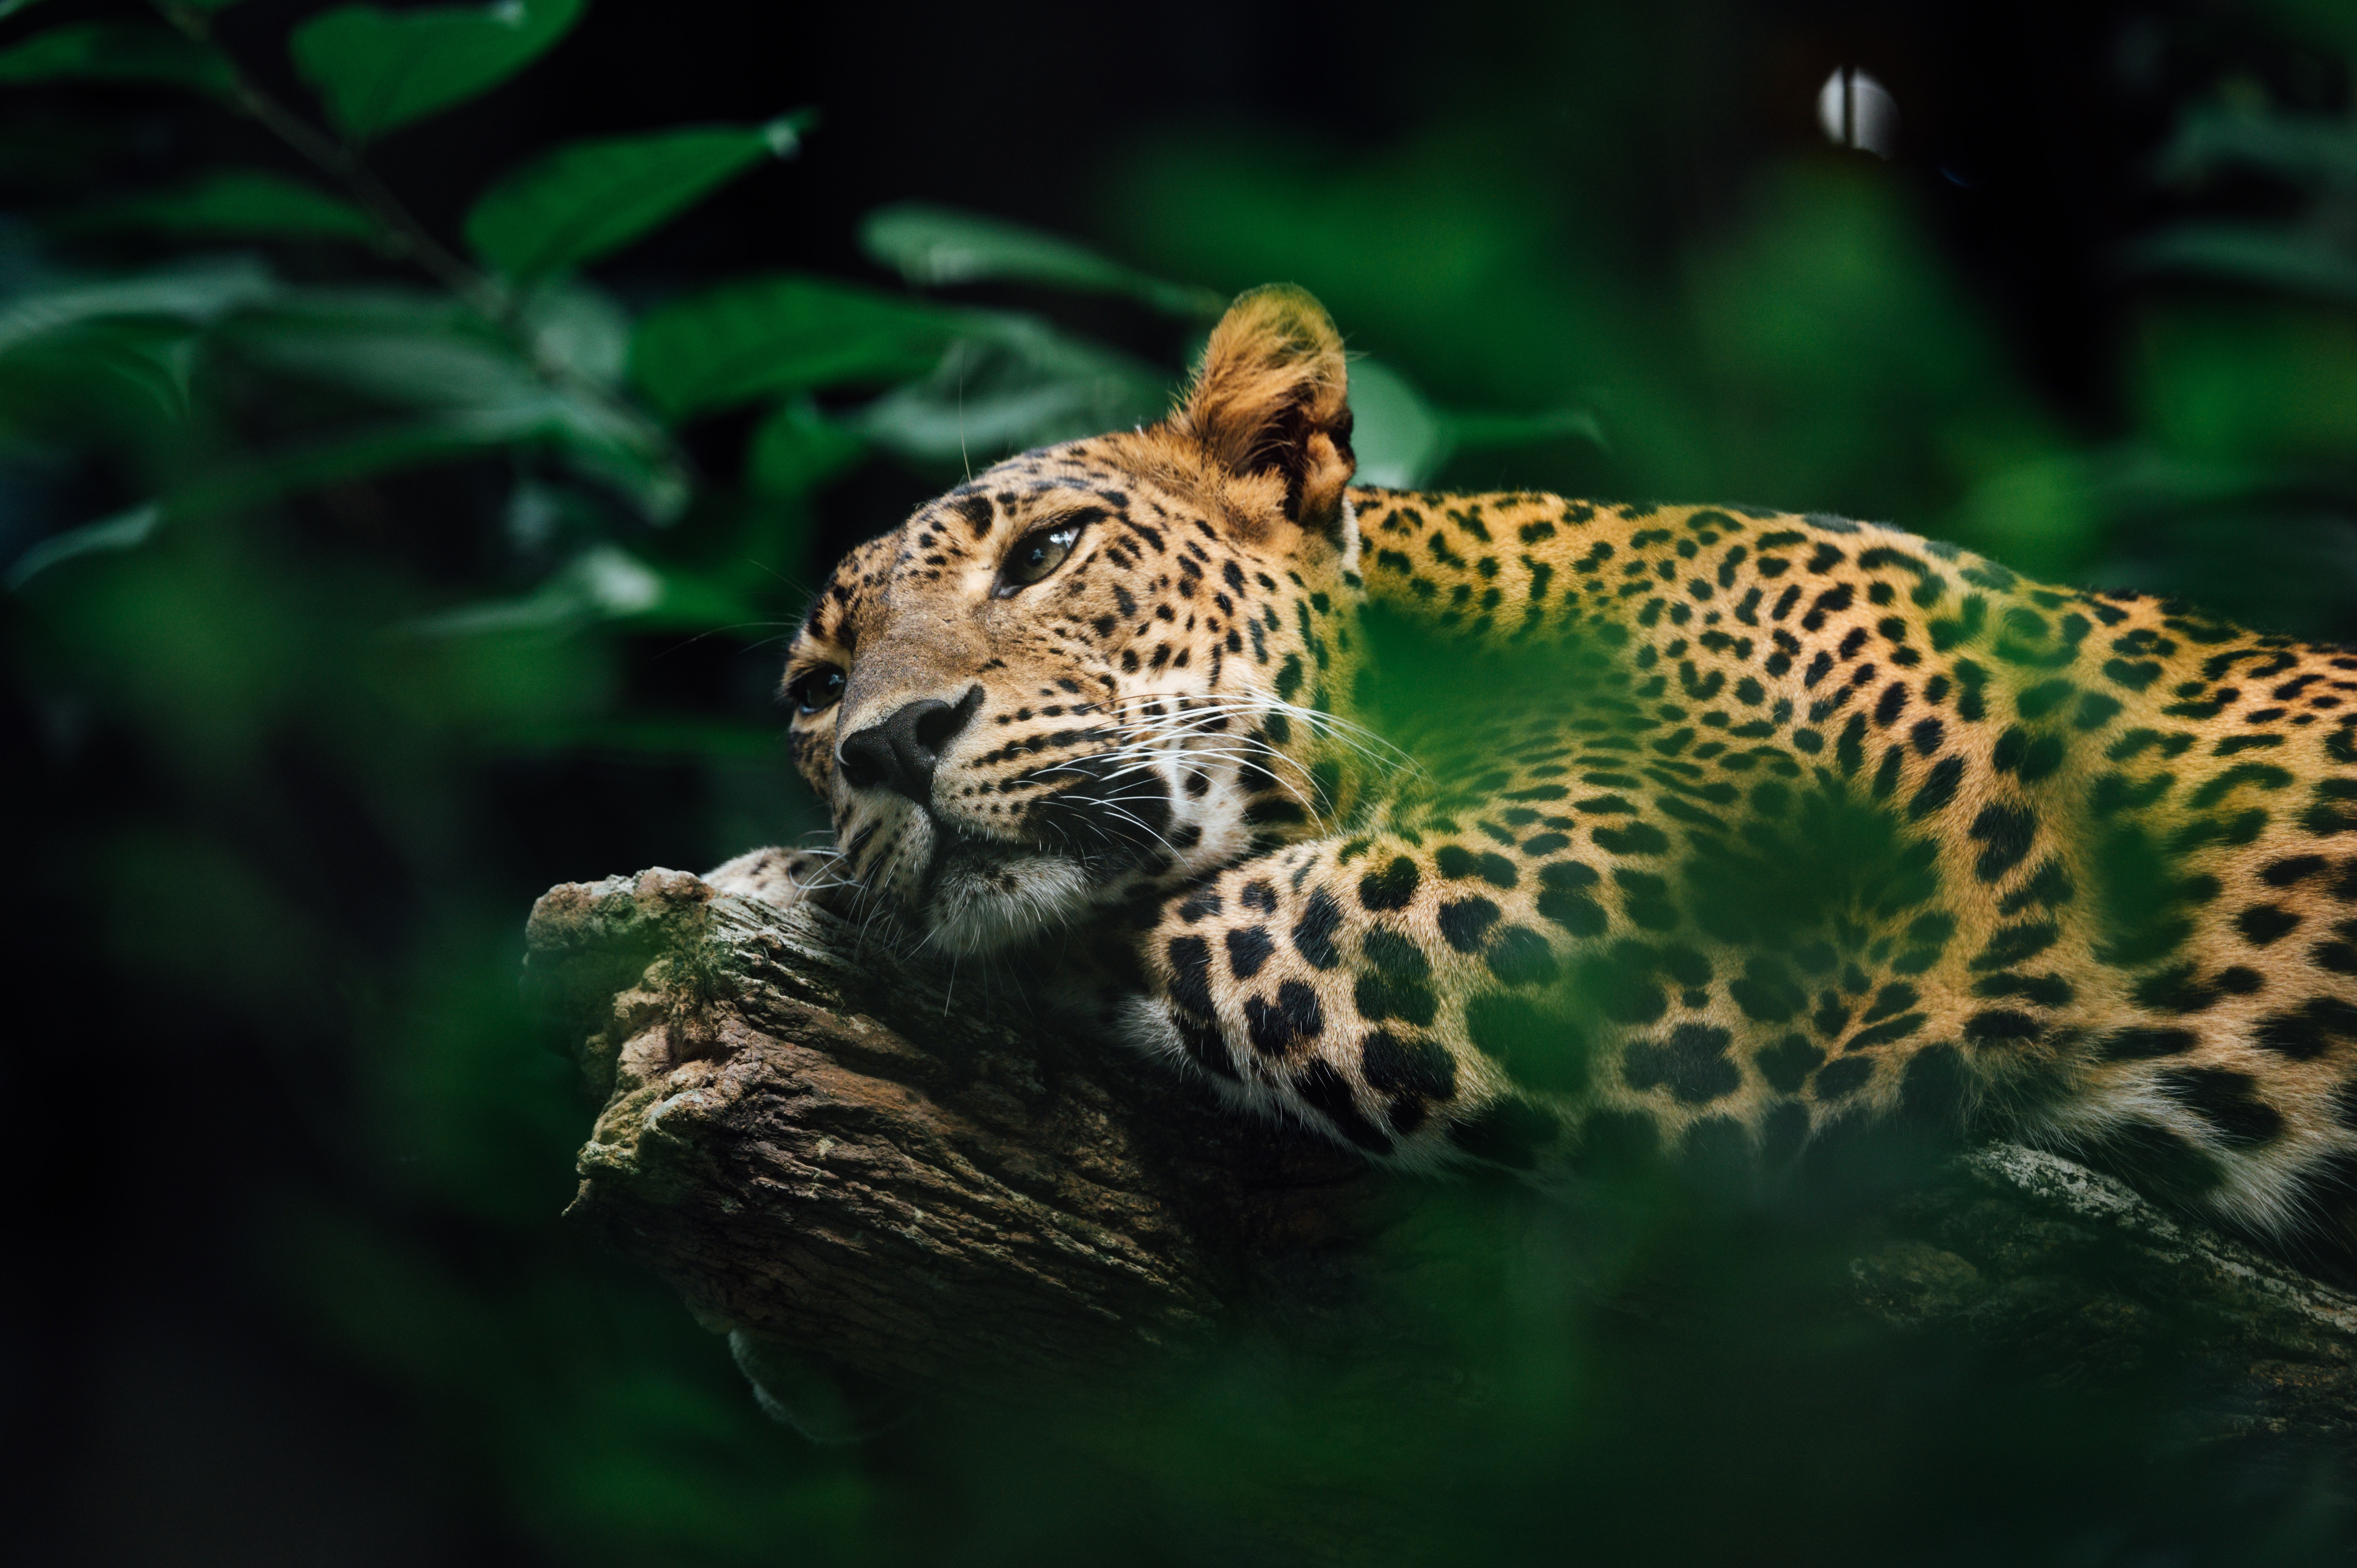 Jaguar: The national mammal of Mexico